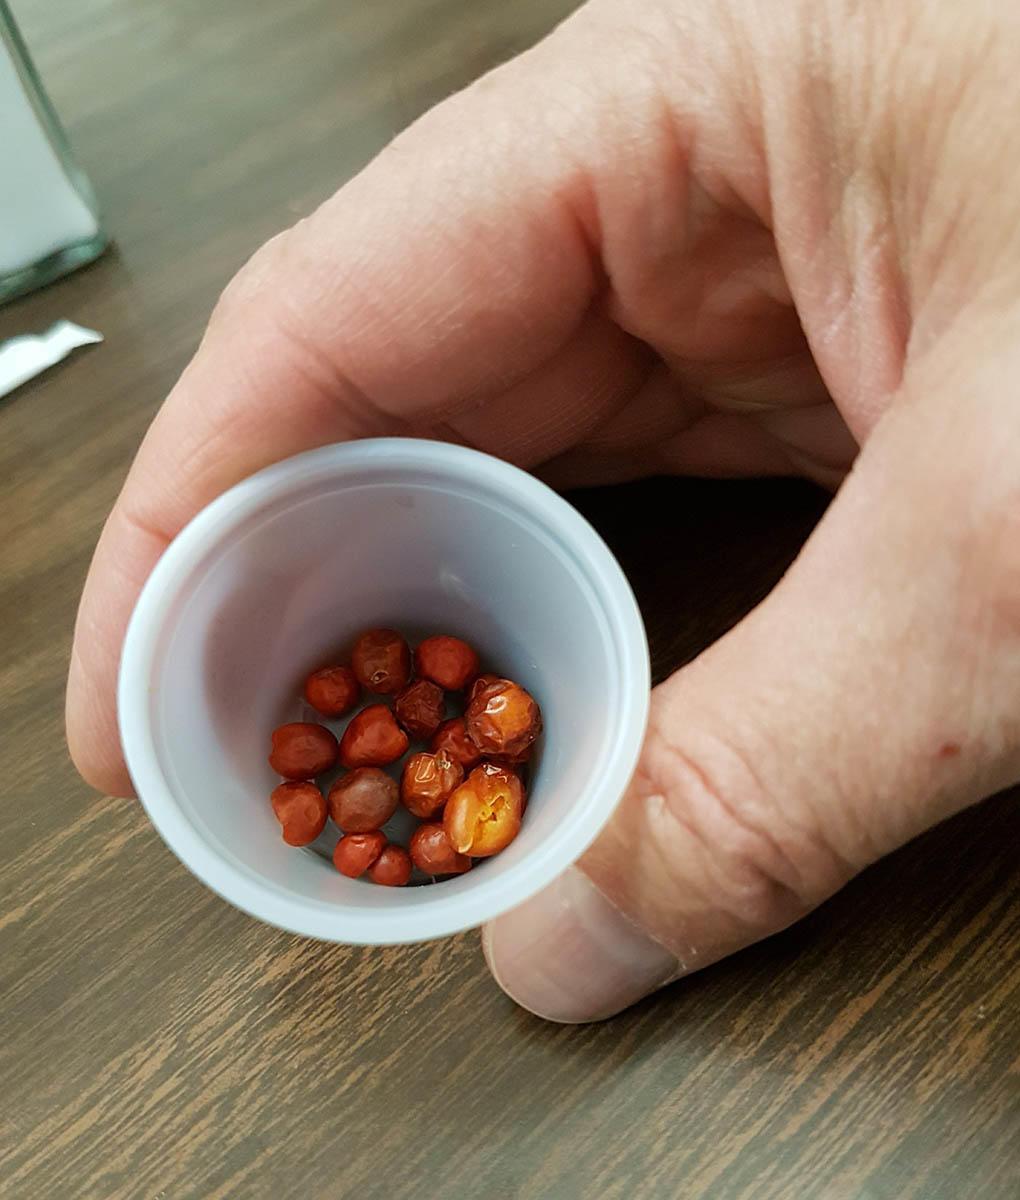 dried peppers orange berry-like in a little cup, held in palm on desk